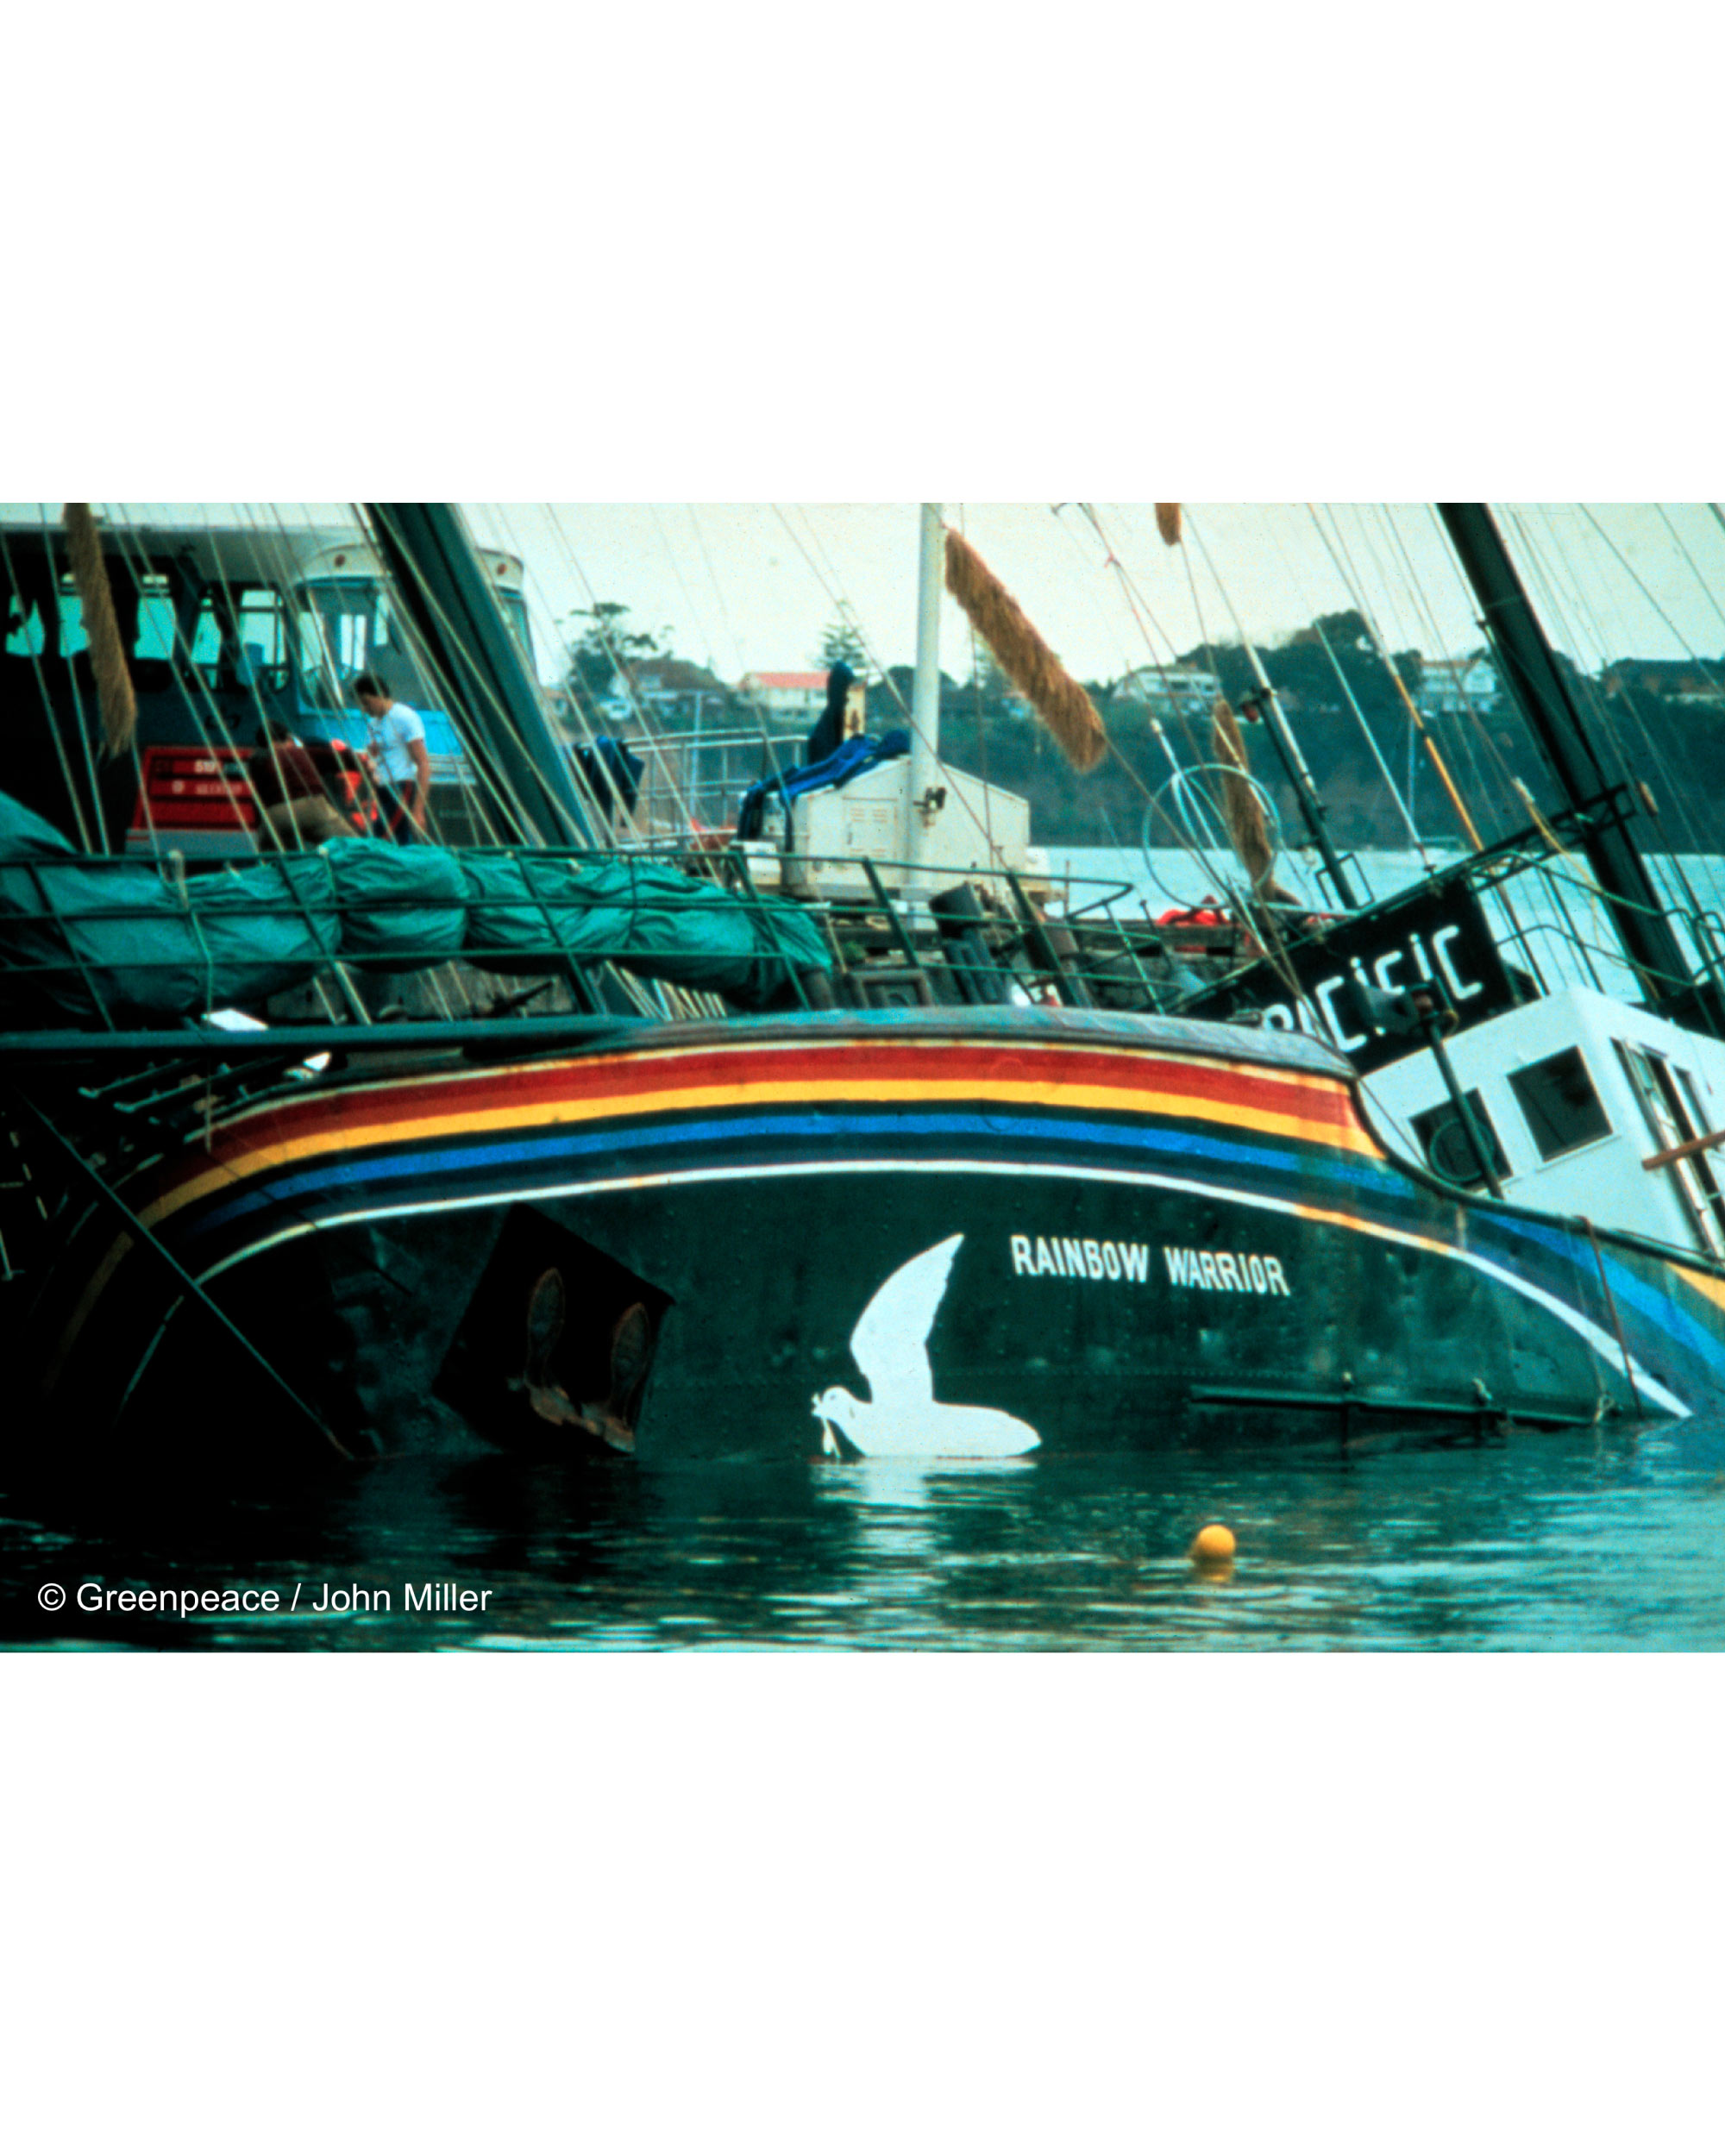 The Rainbow Warrior in New Zealand after the bombing by French Secret Service Agents. Image courtesy of Greenpeace.